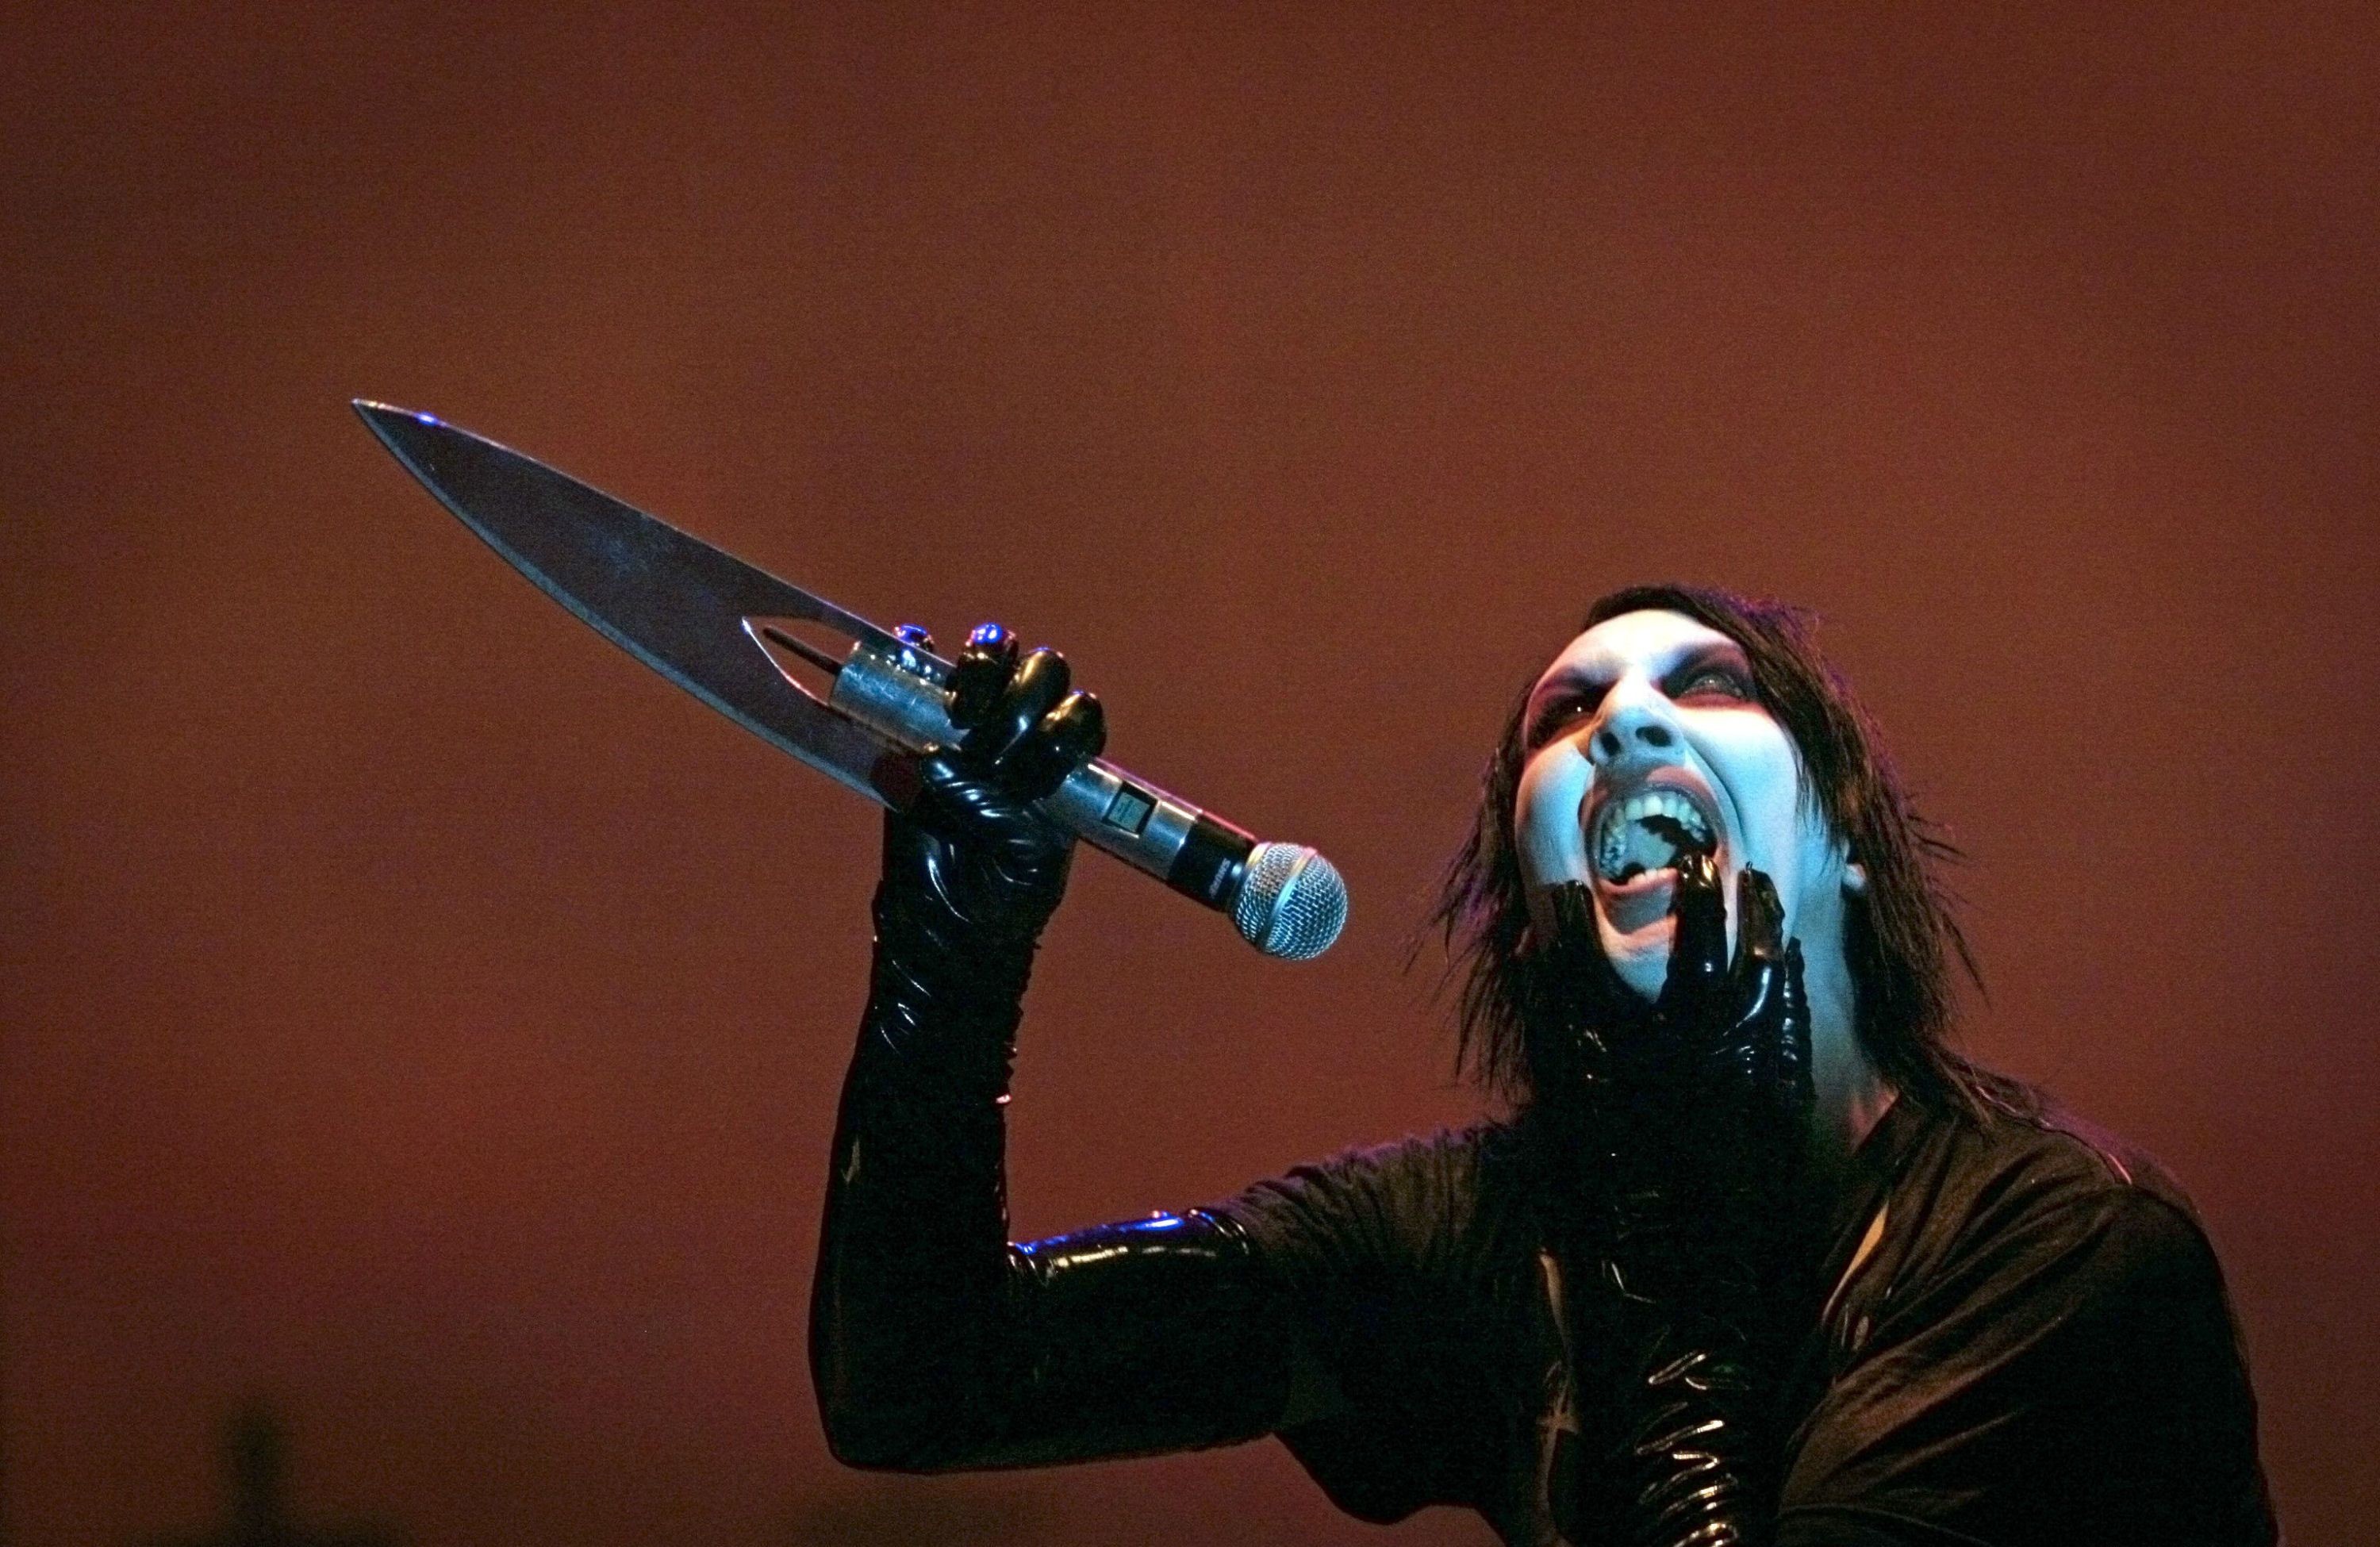 3000x1950 marilyn manson wallpaper pictures free by Walton Sinclair (2016-08-15)